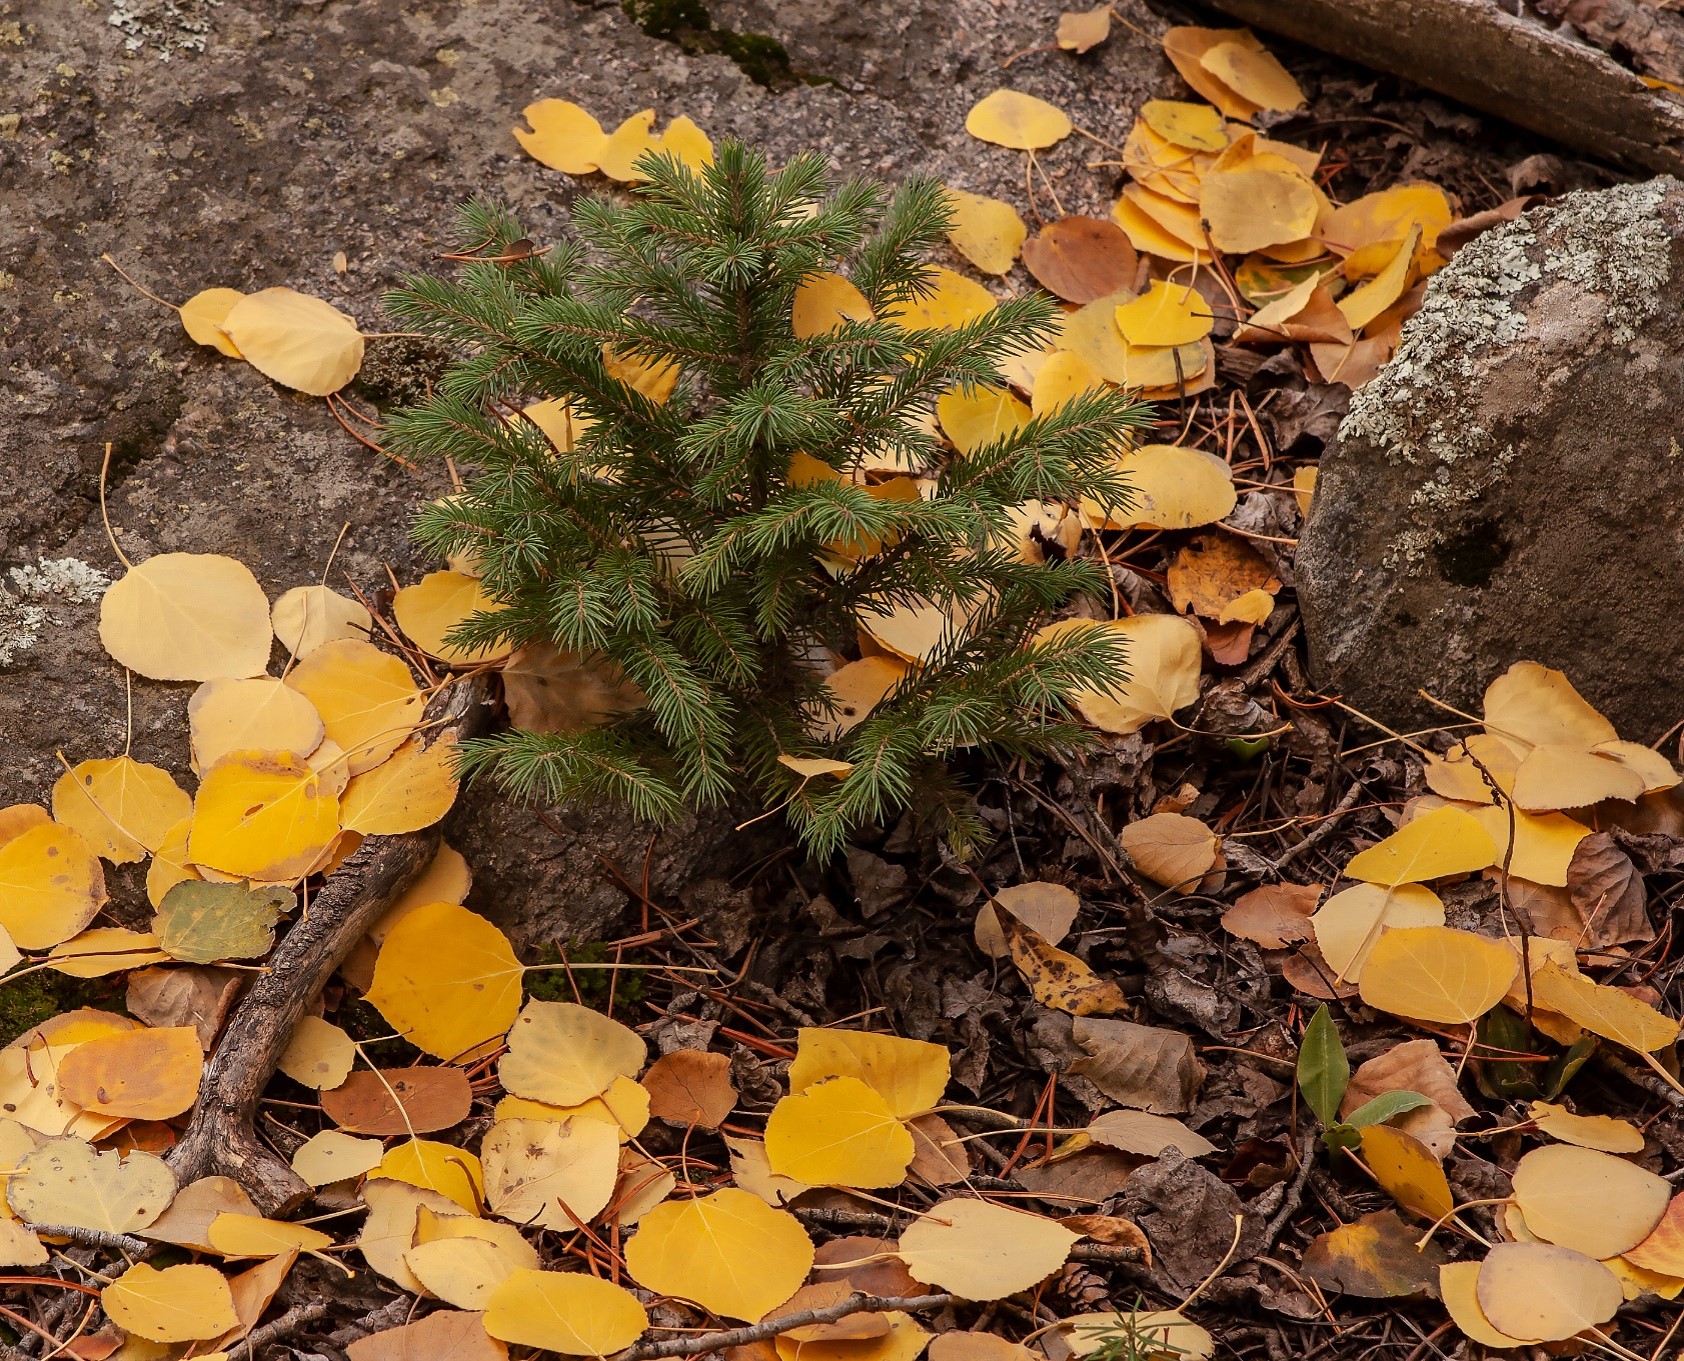 A small tree in the middle of a pile of leaves.